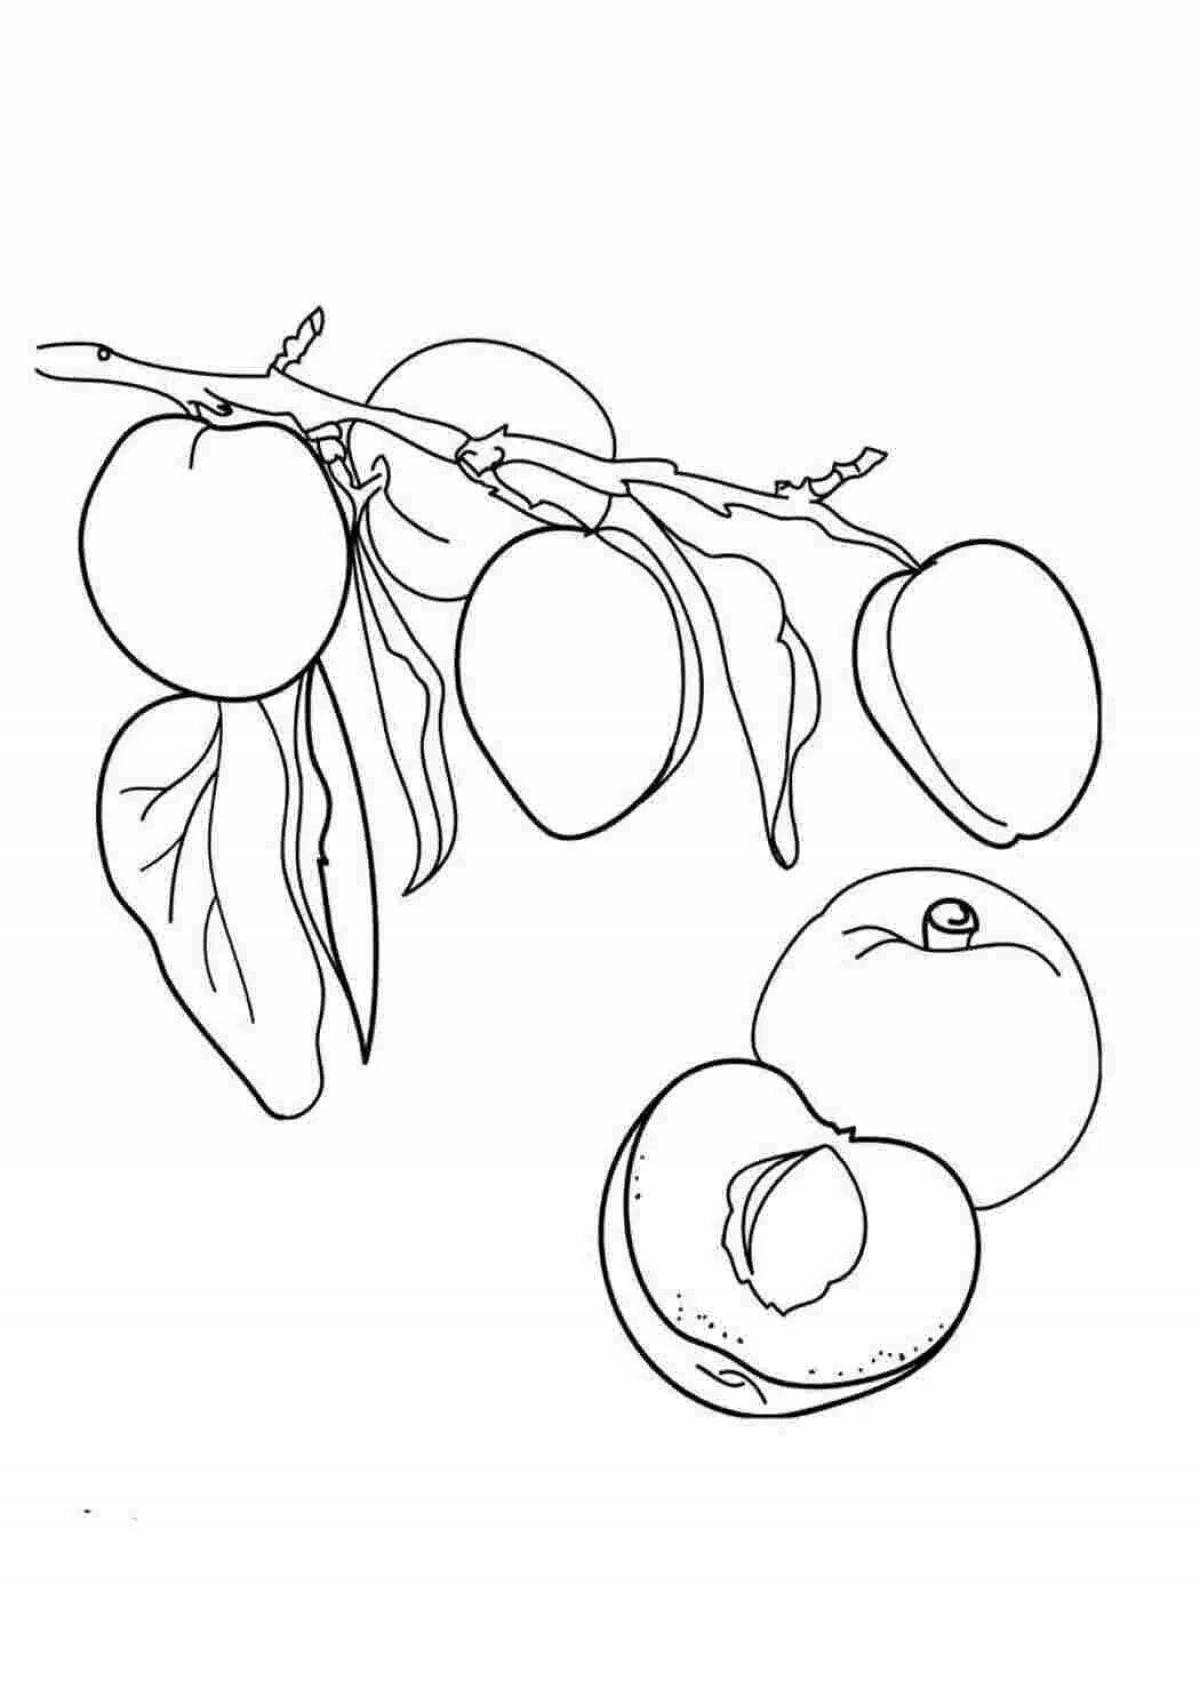 Attractive apricot coloring book for kids